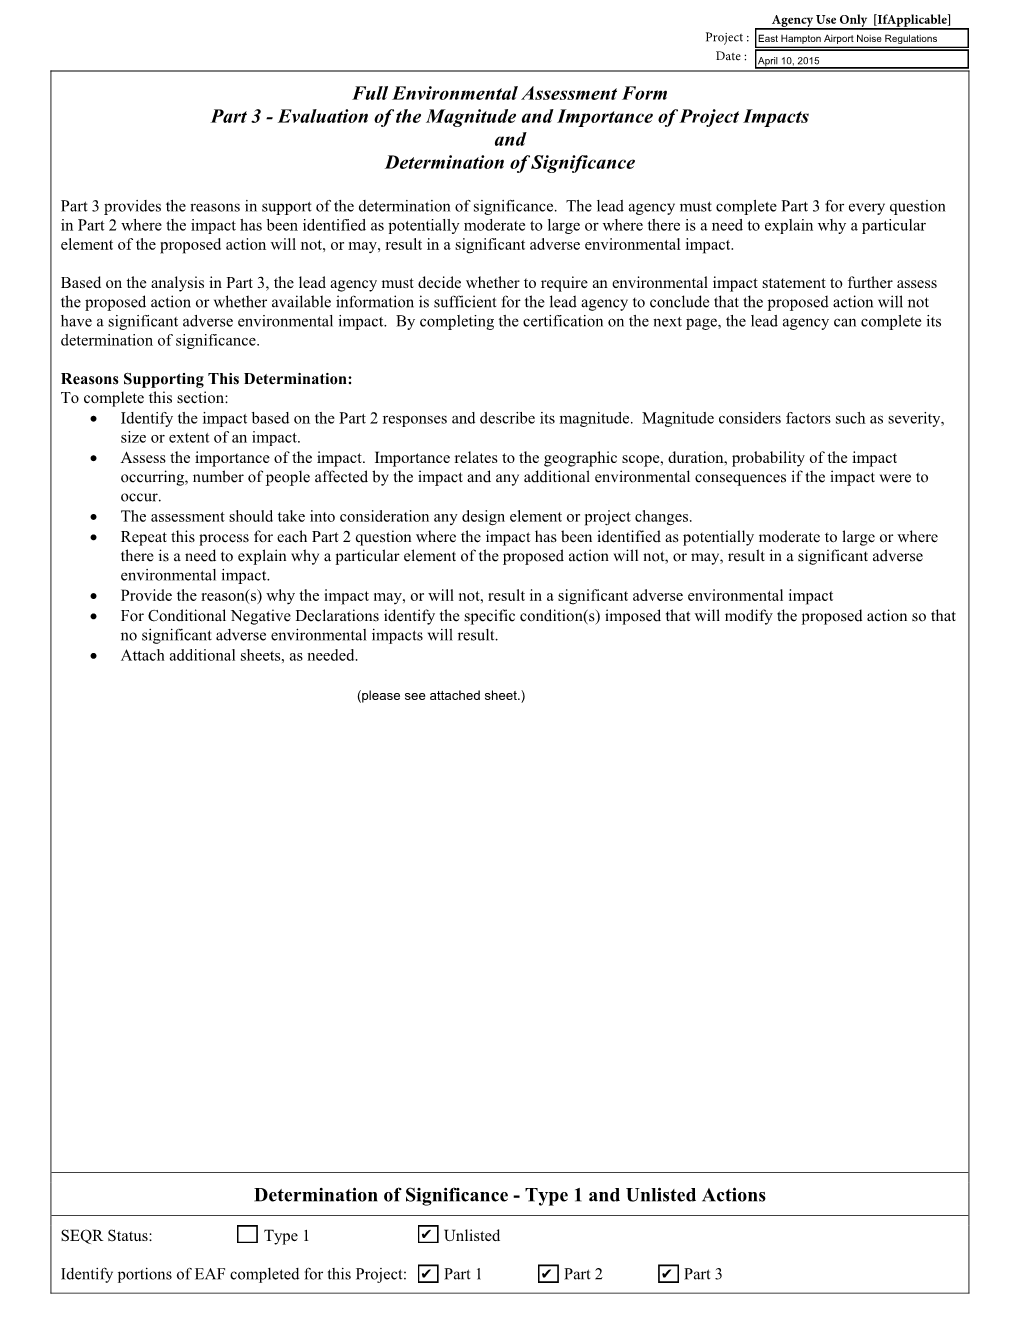 Full Environmental Assessment Form Part 3 - Evaluation of the Magnitude and Importance of Project Impacts and Determination of Significance